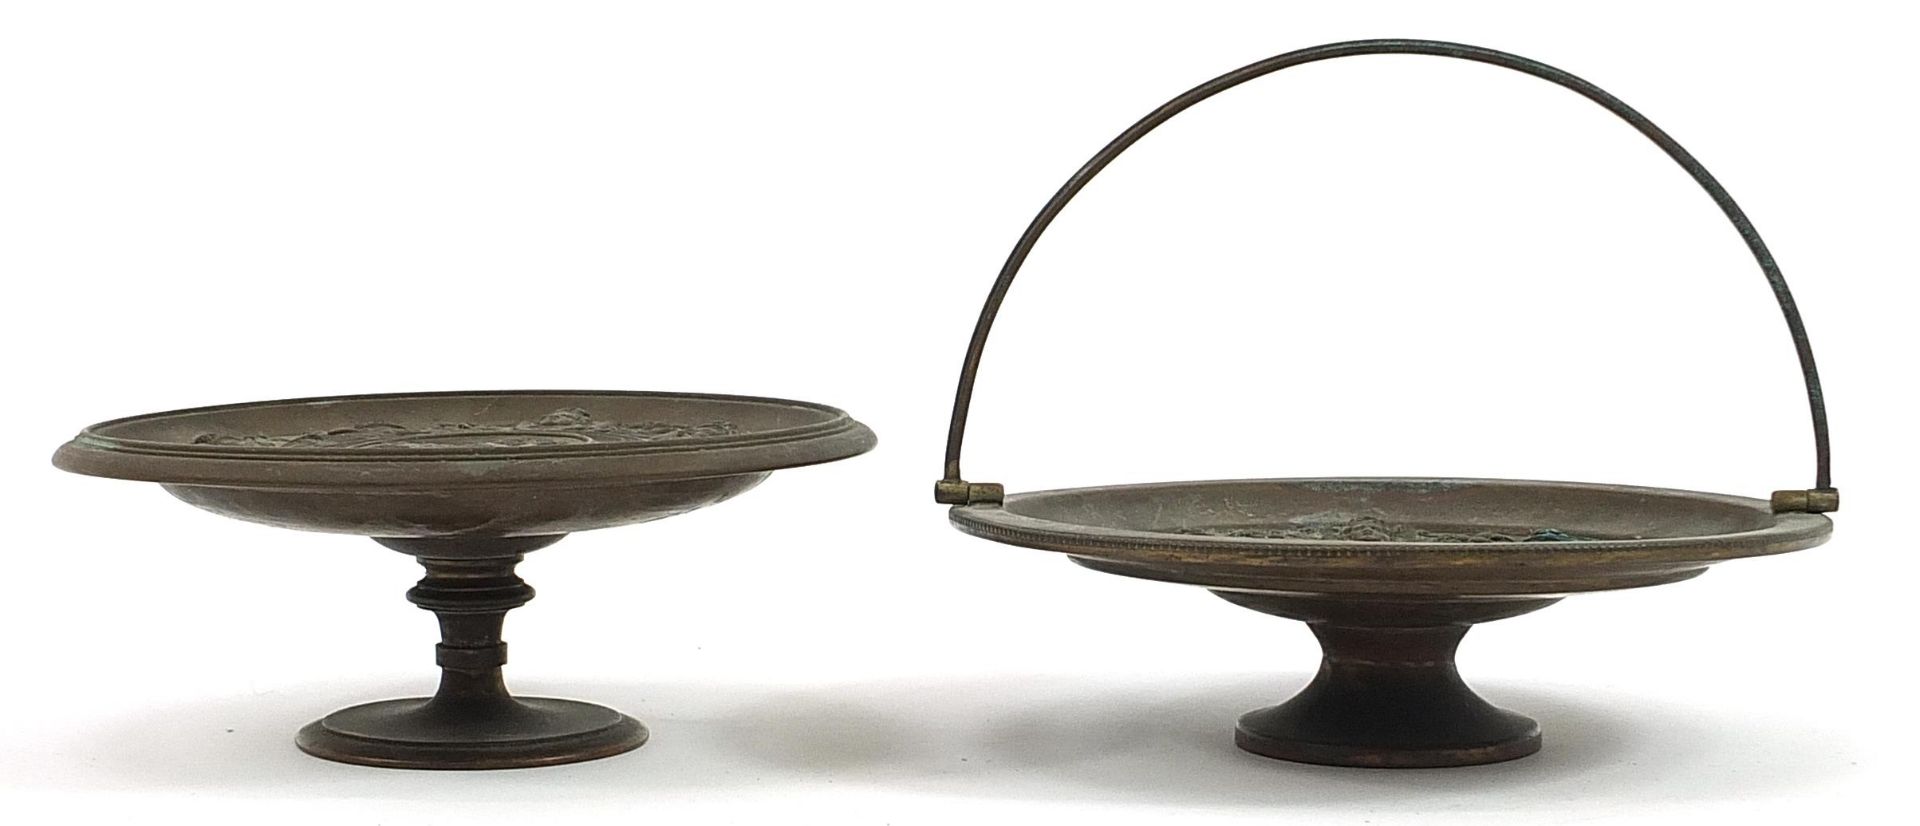 Grand Tour bronzed comport and pedestal dish with swing handle, each decorated with classical